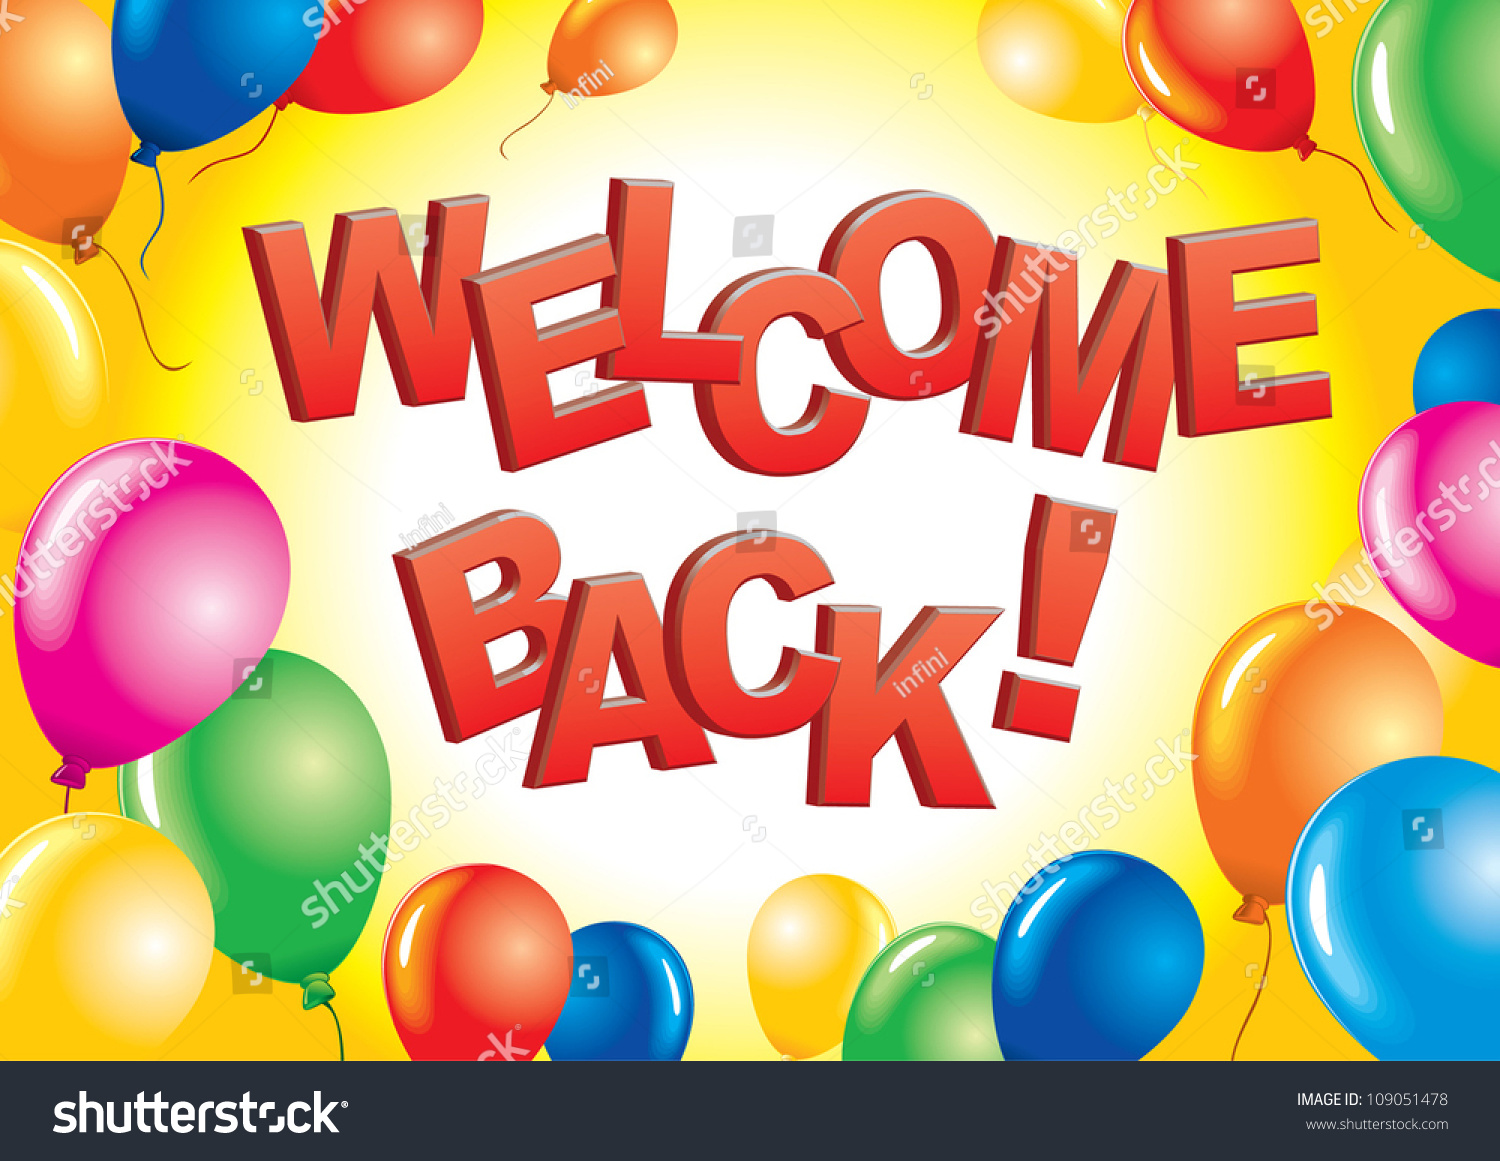 stock-vector-welcome-back-sign-109051478.jpg